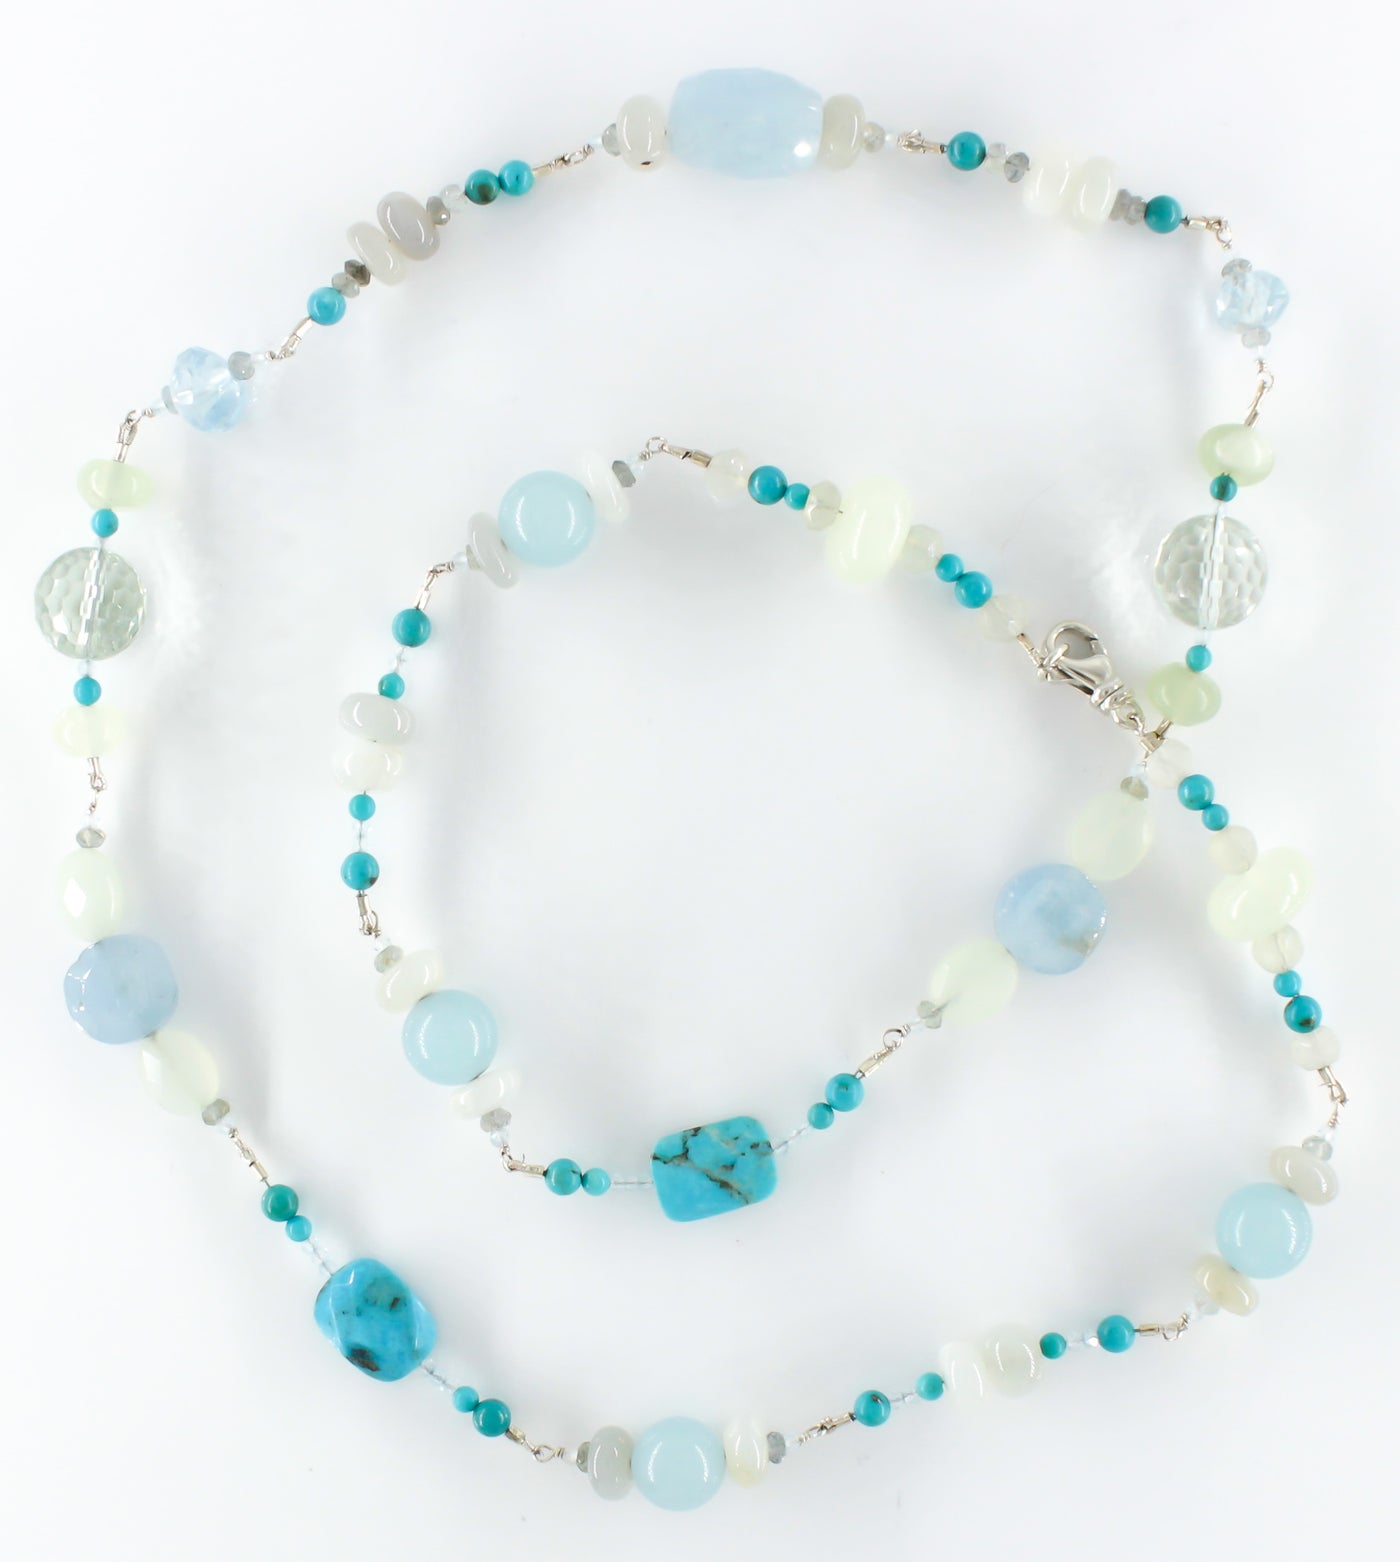 Segmented Sterling Silver Gem Bead Necklace